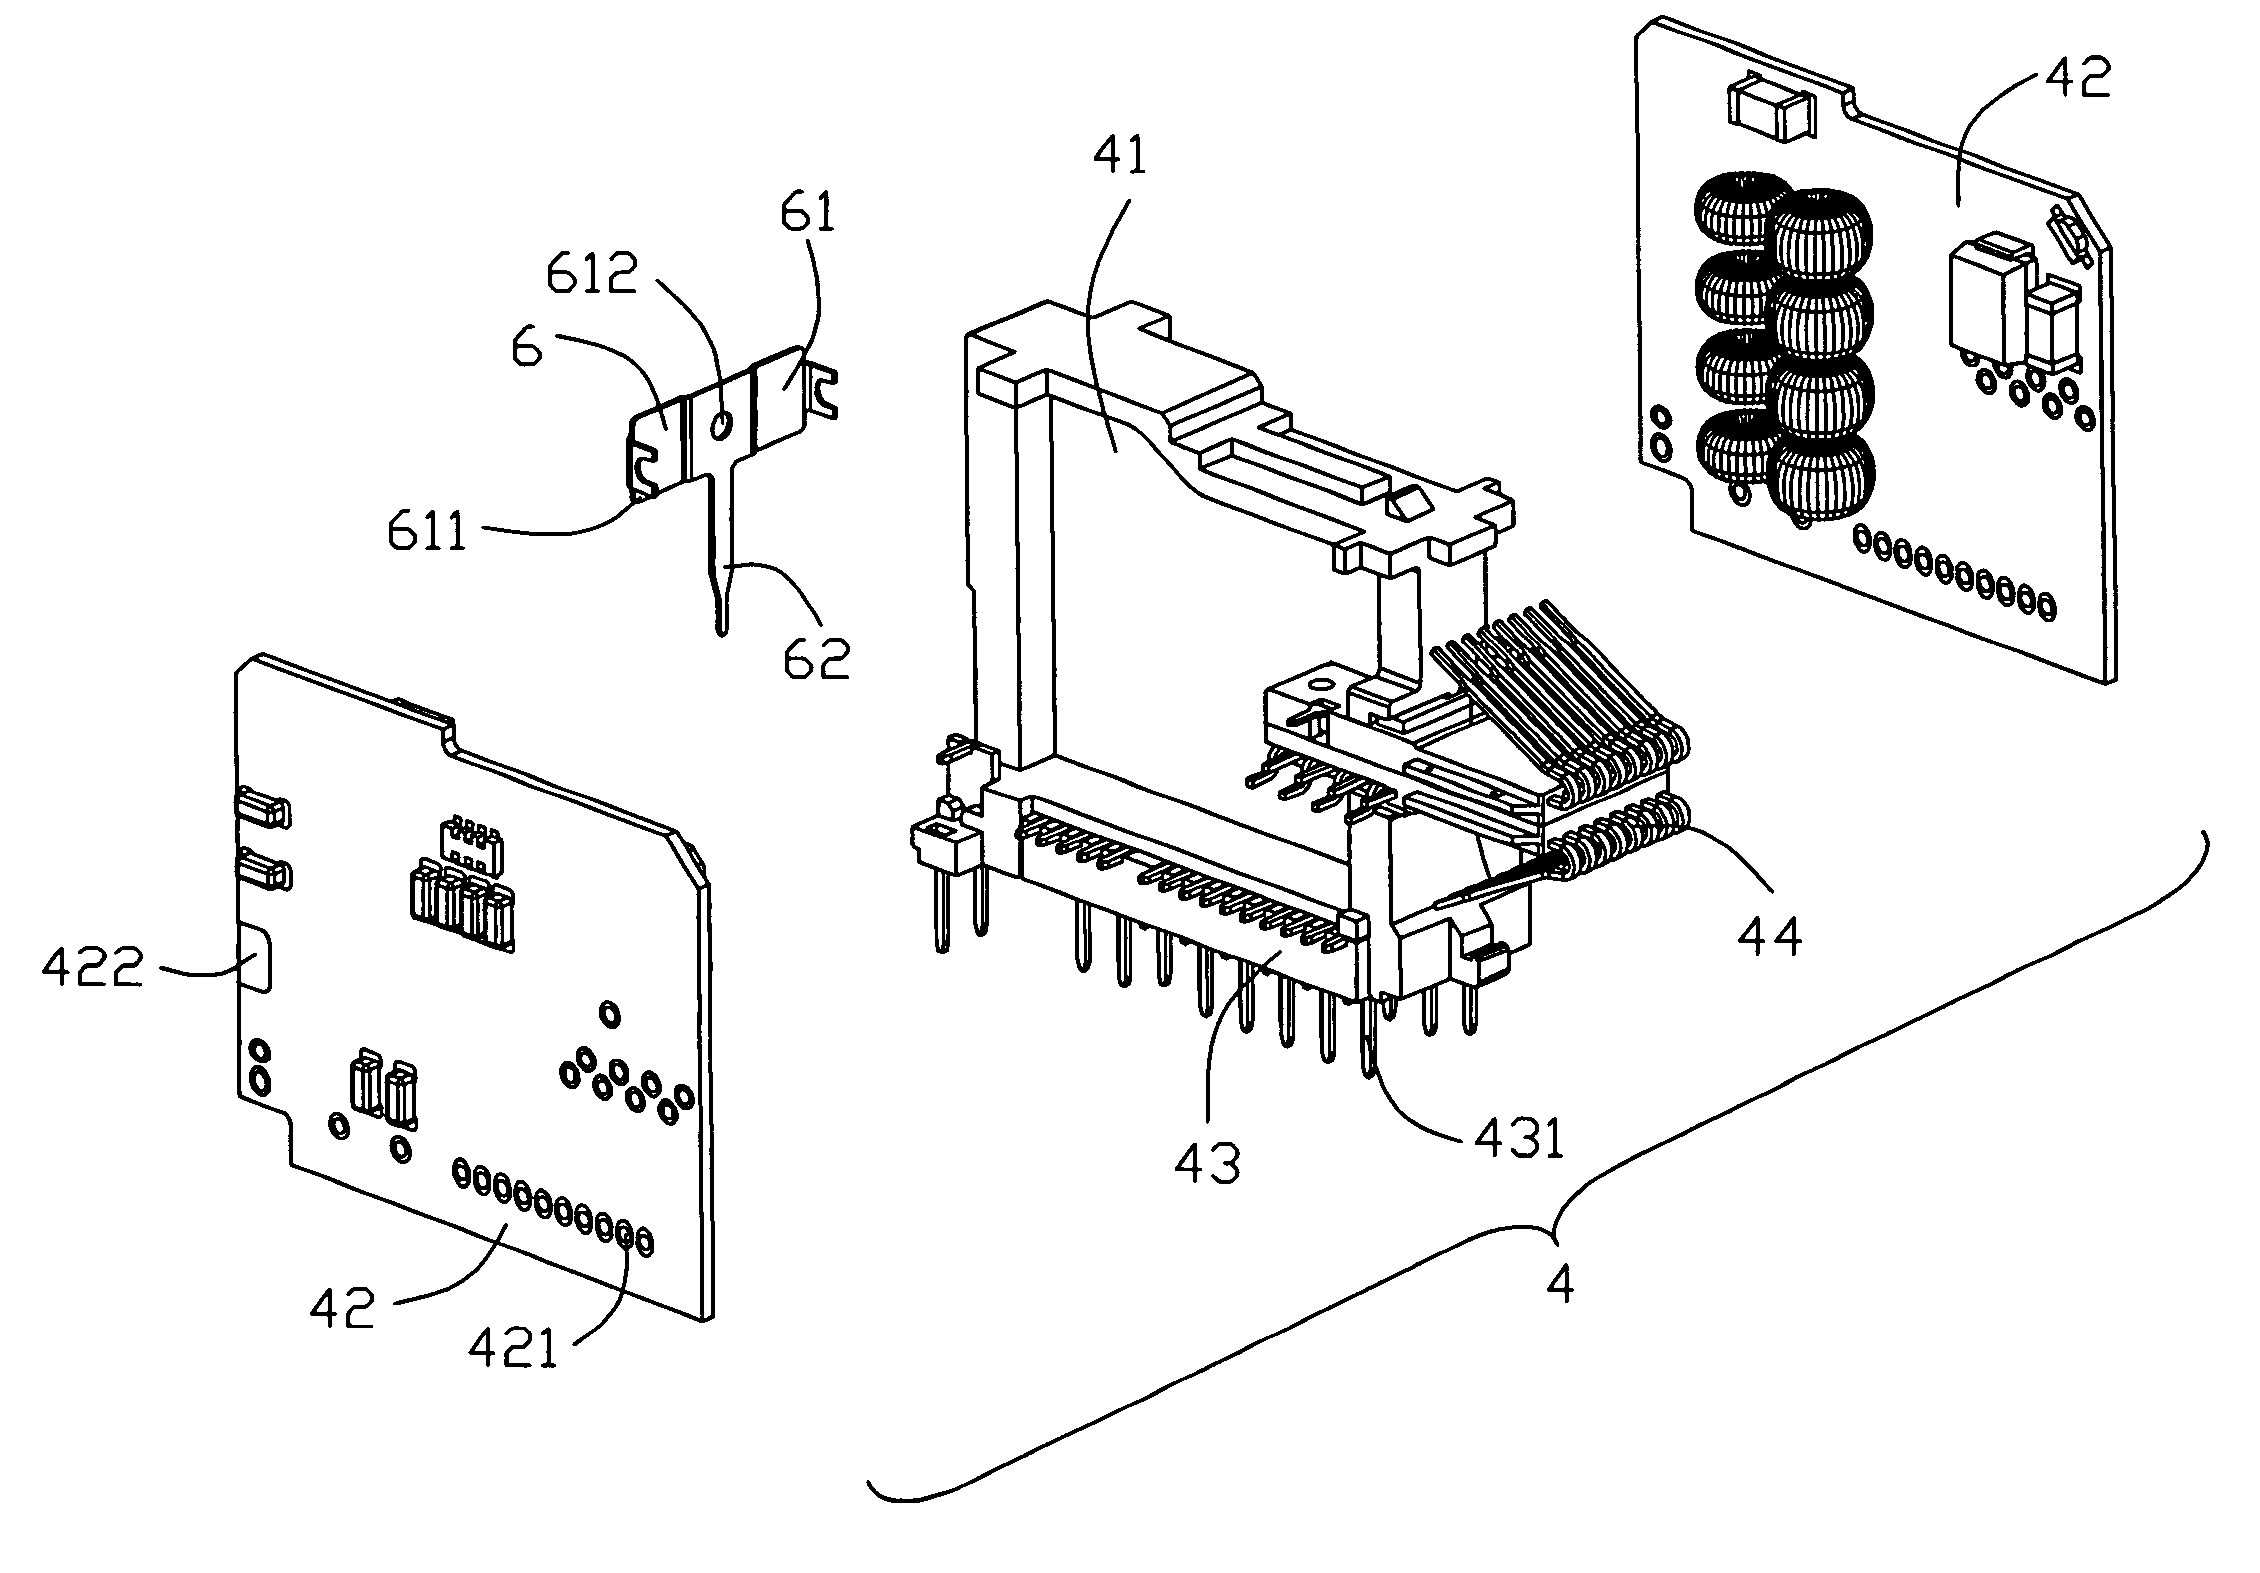 Electrical connector having improved grounding member